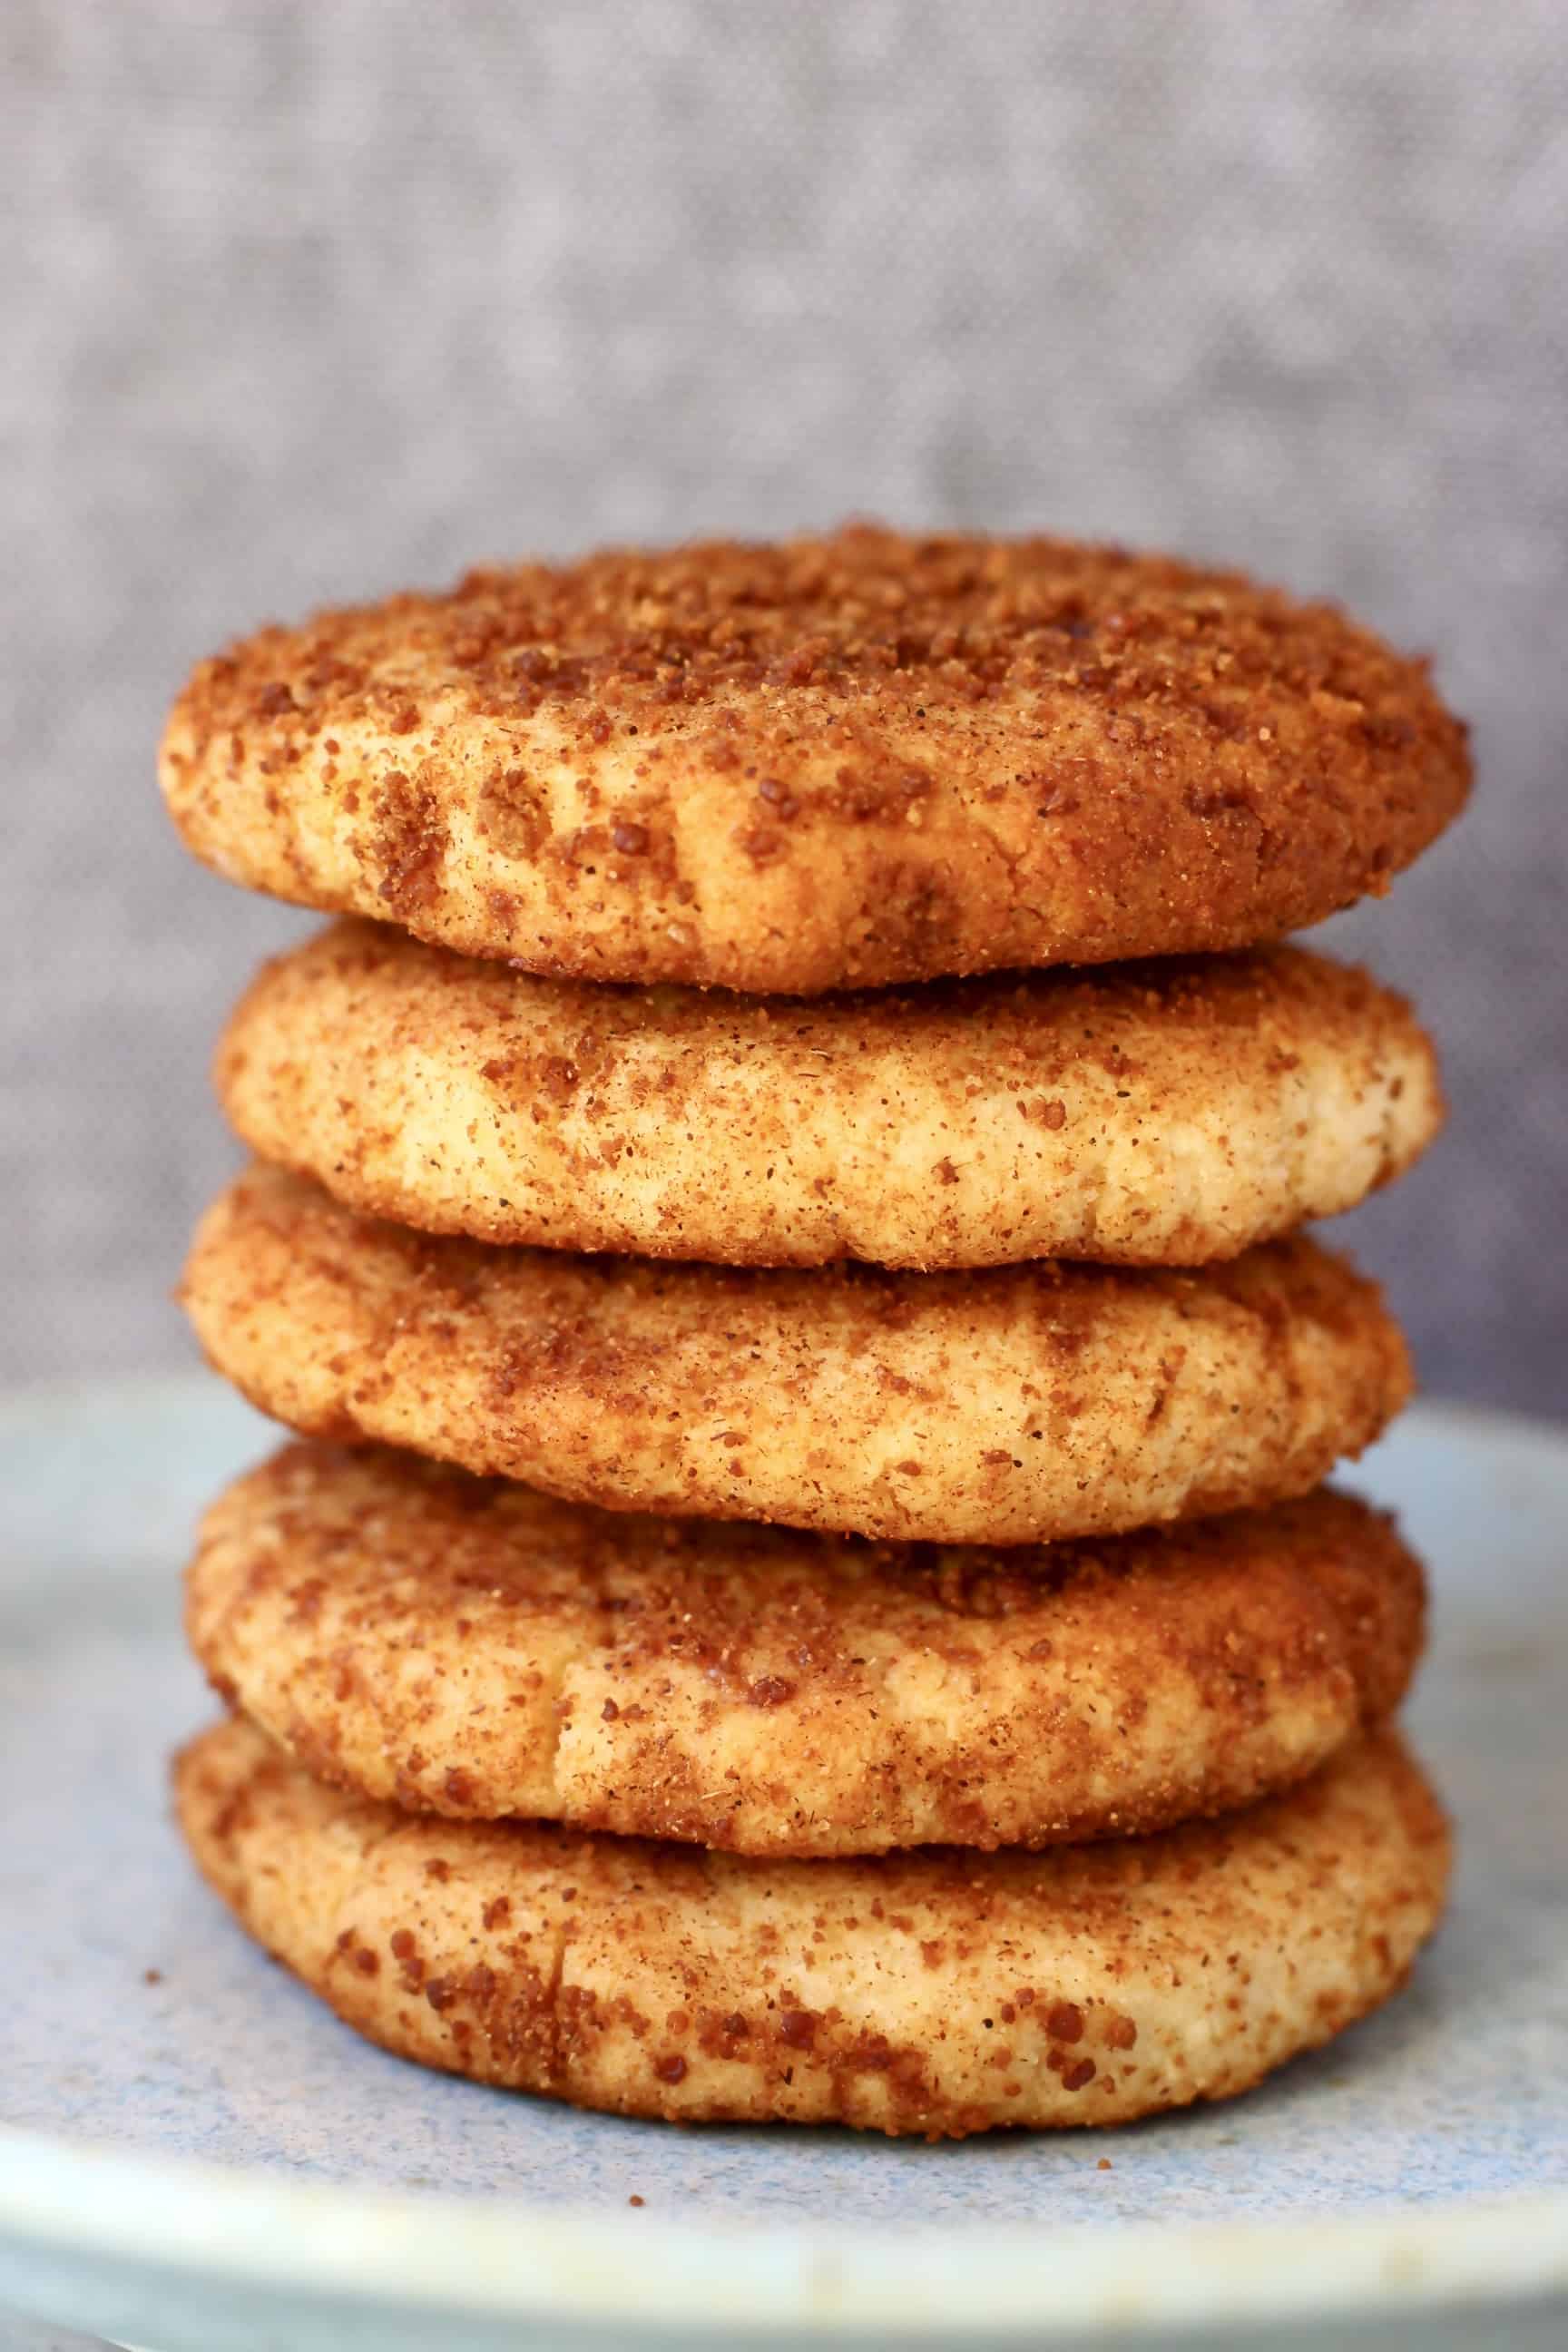 Five gluten-free vegan snickerdoodles stacked on top of each other on a plate